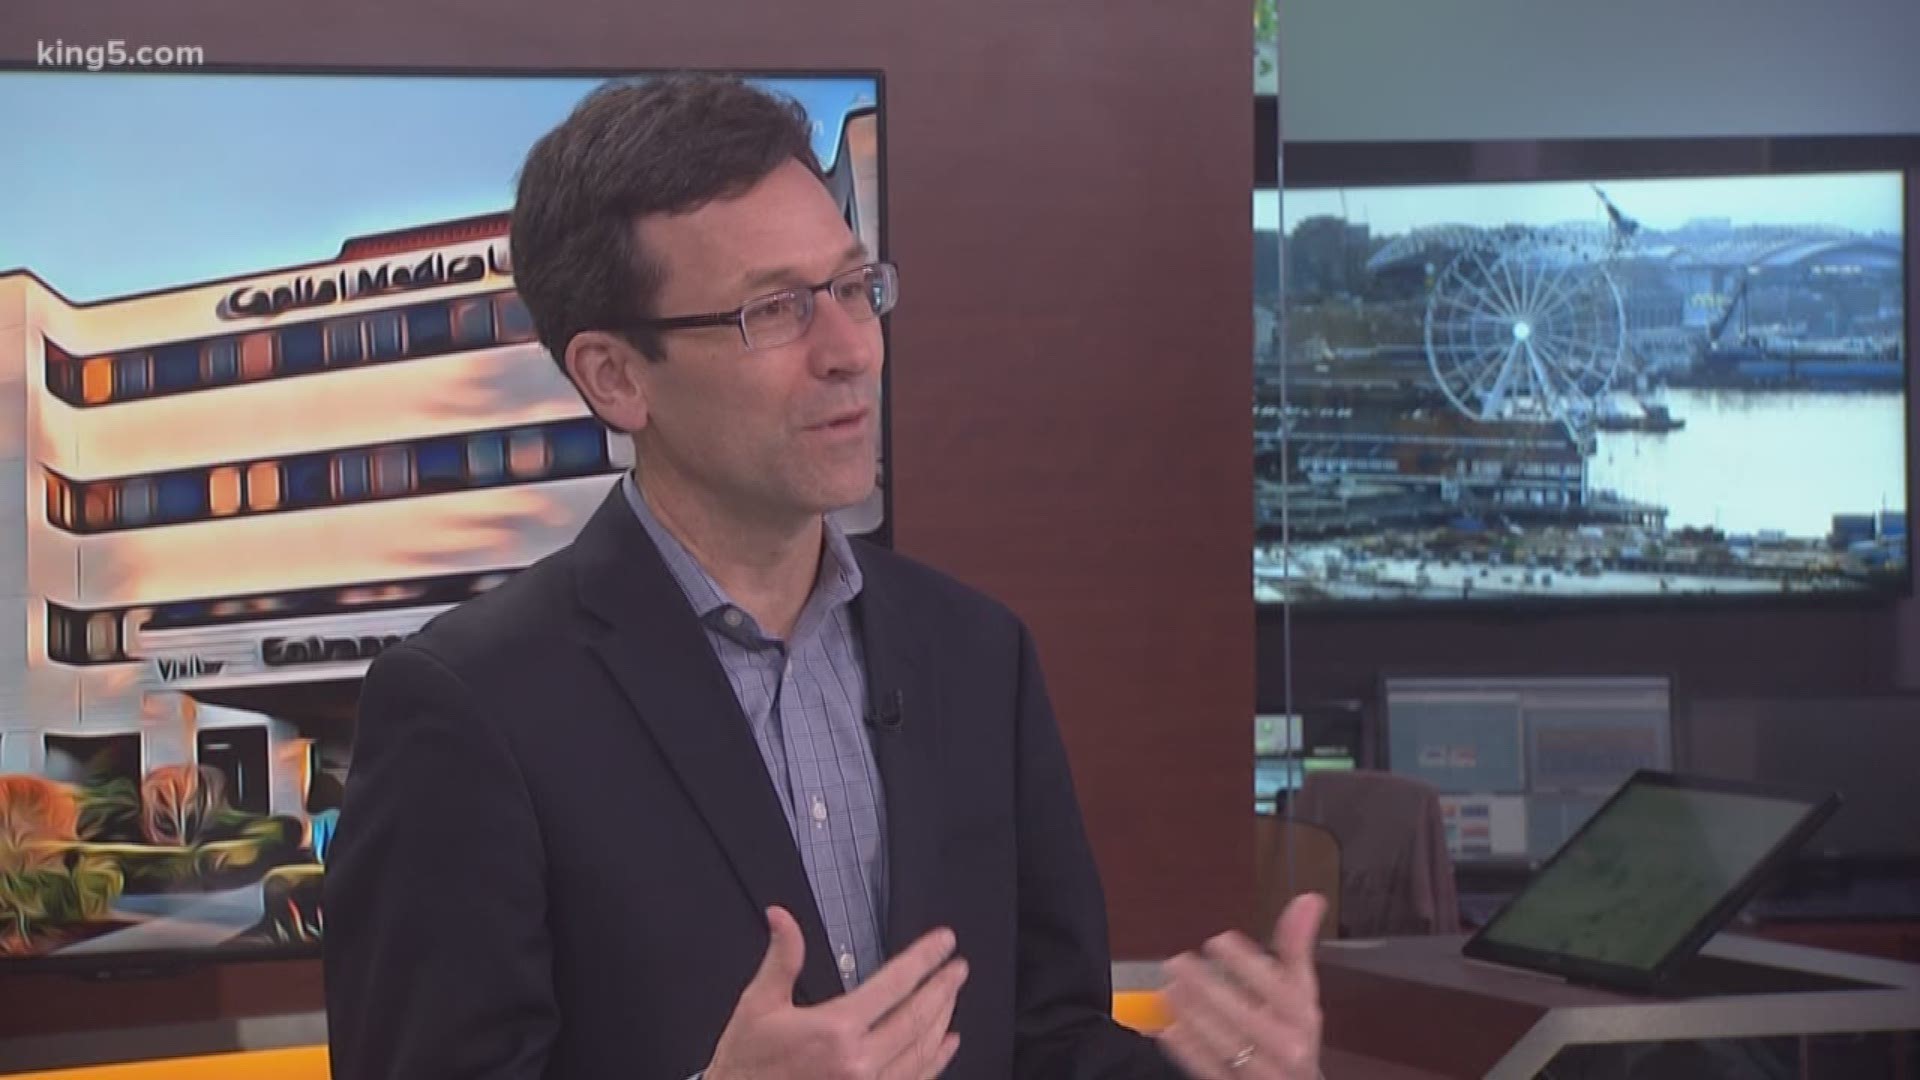 Attorney General Bob Ferguson discusses the lawsuit against Capital Medical Center, who denied medical services to patients who required charity care.